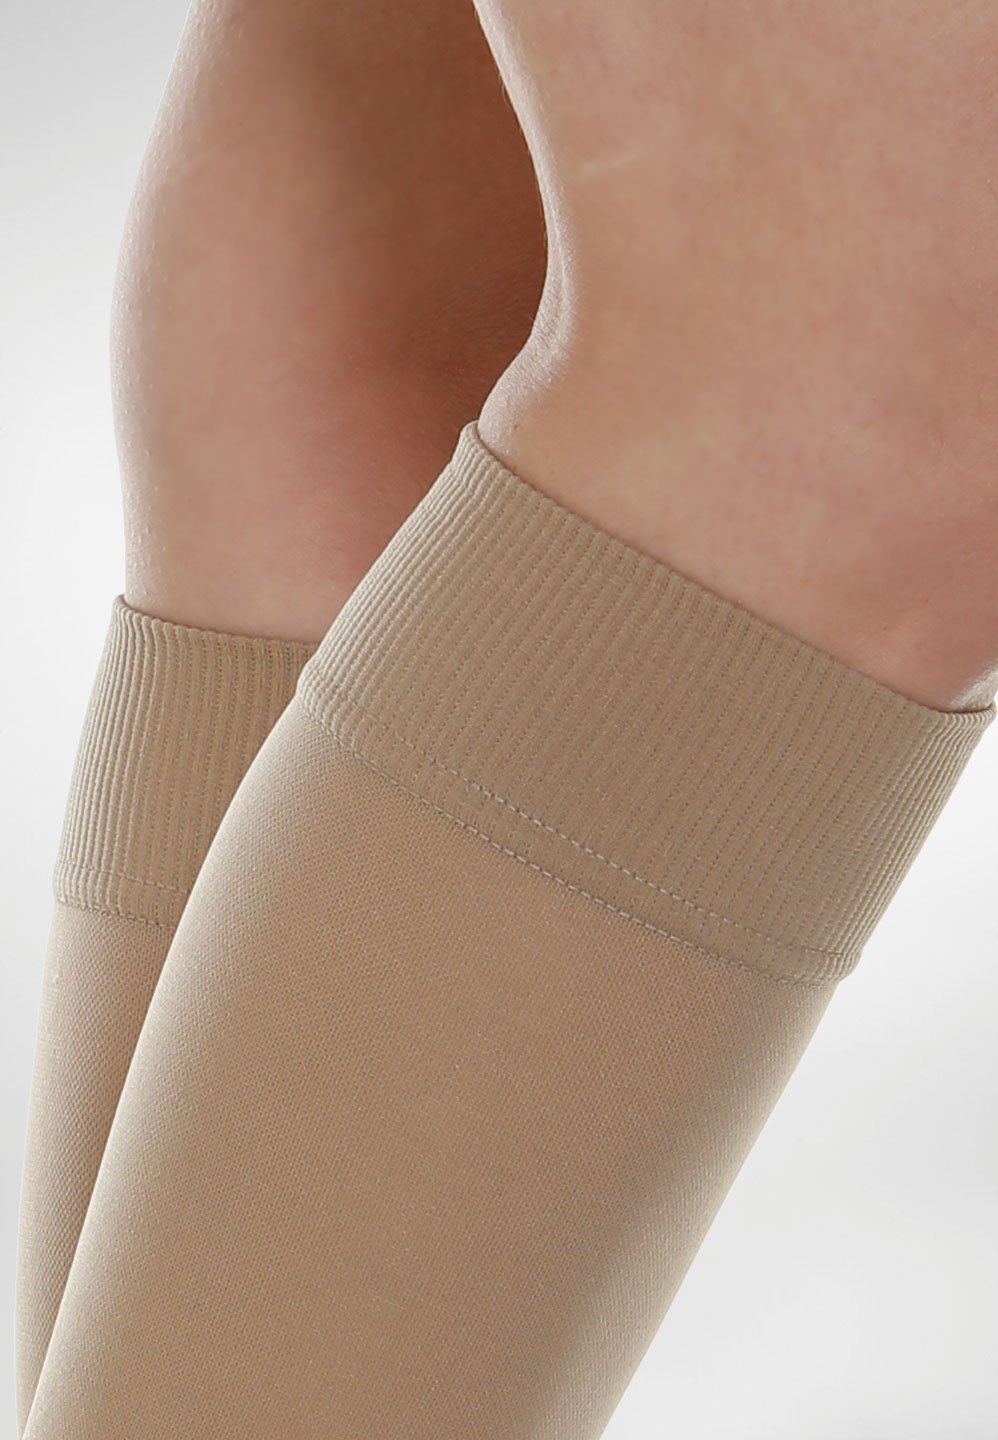 RELAXSAN Basic 950A (2 Pairs - Skin 4/XL) - open-toe firm support knee high socks 20-30 mmHg, 100% Made in Italy